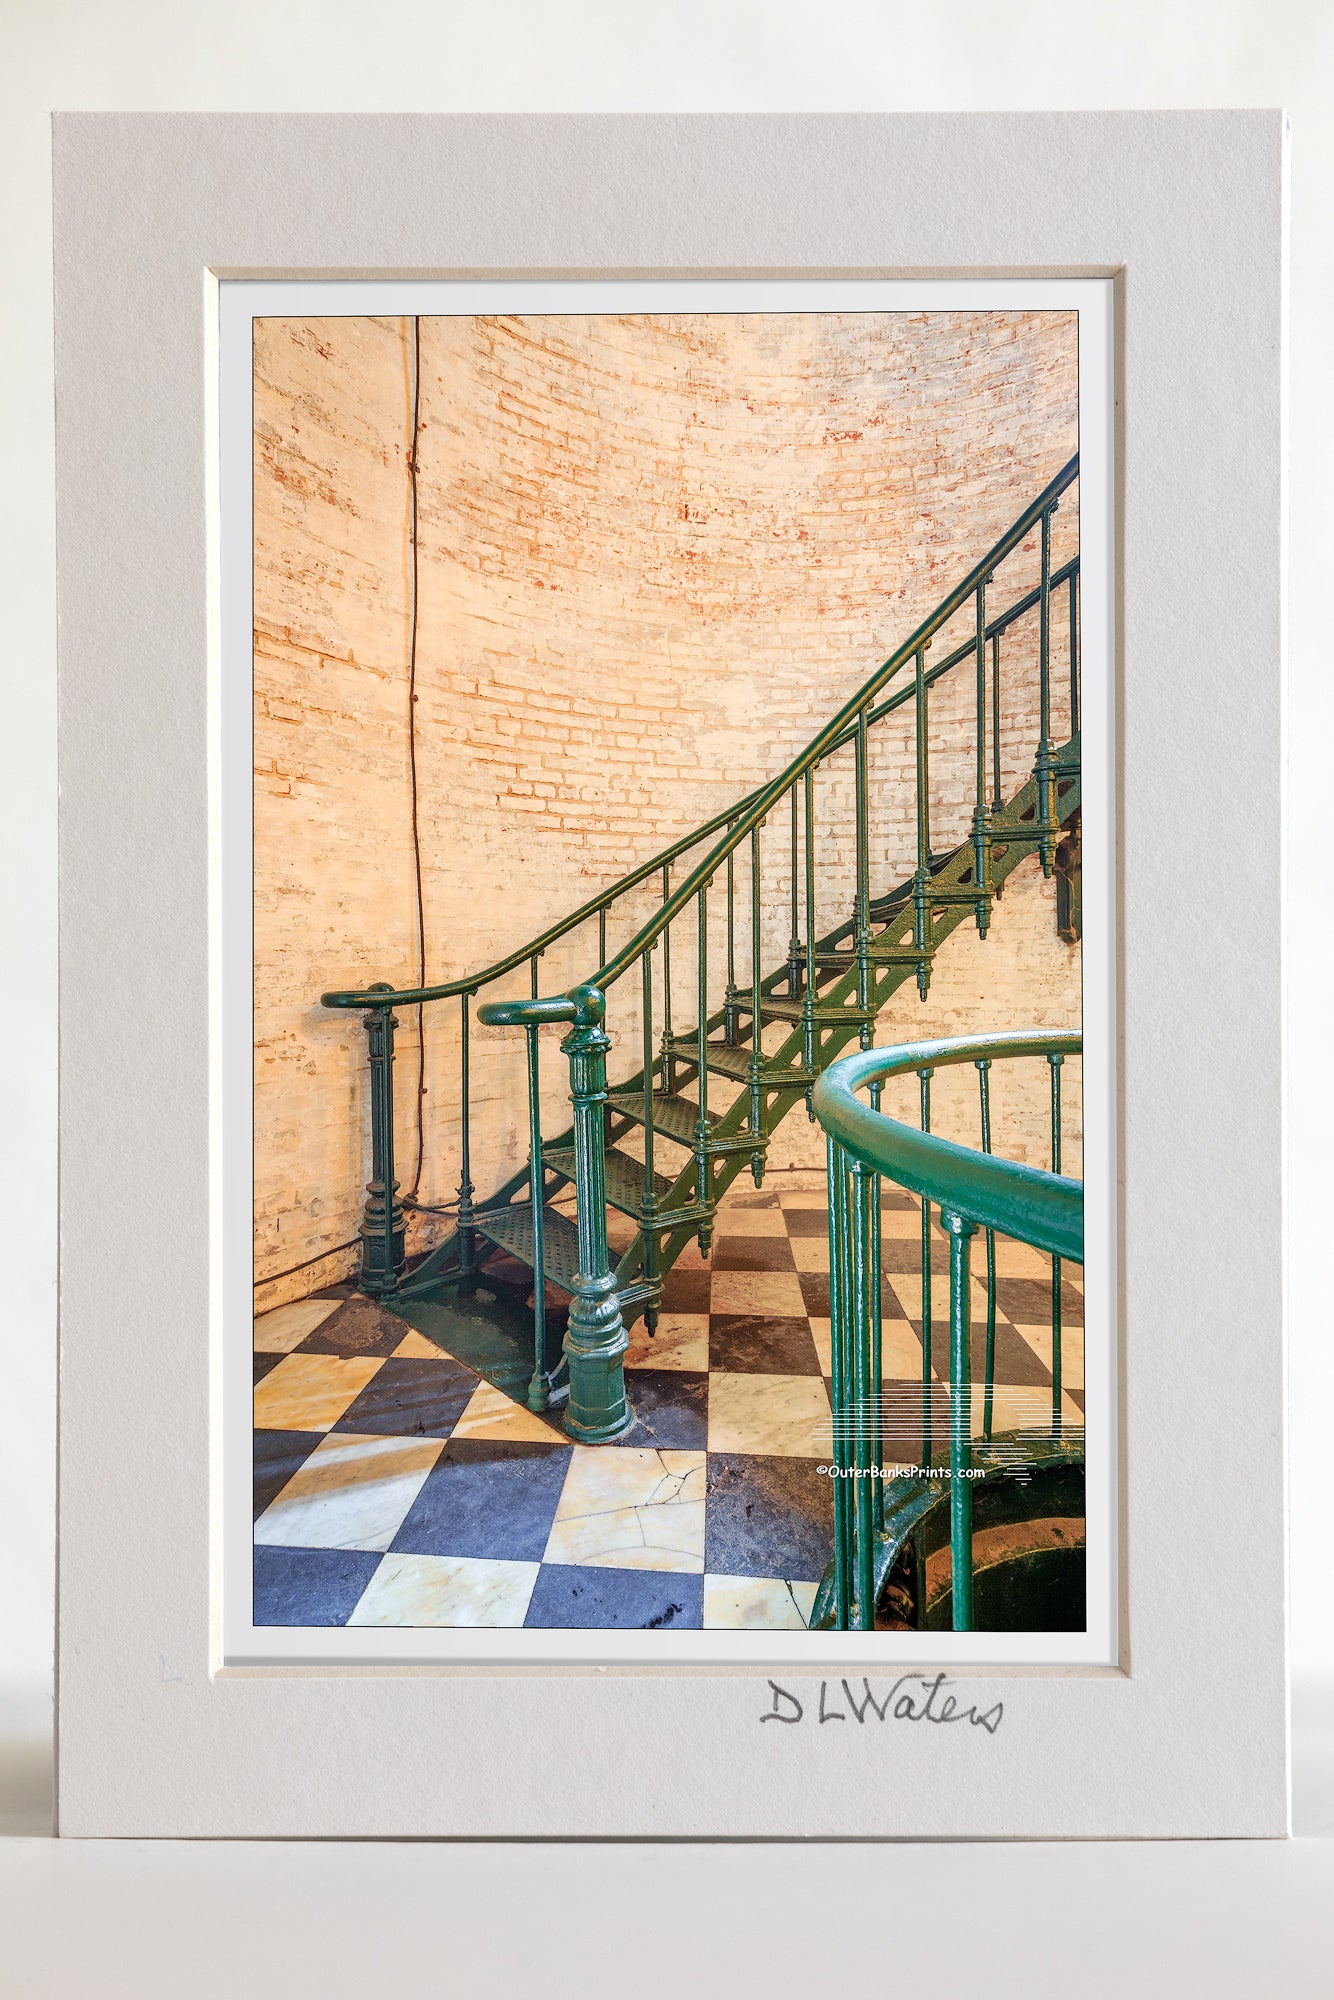 4 x 6 luster print in a 5 x 7 ivory mat of Checkerboard pattern tile leading up to the spiral staircase at Currituck Beach Lighthouse in Corolla, NC.